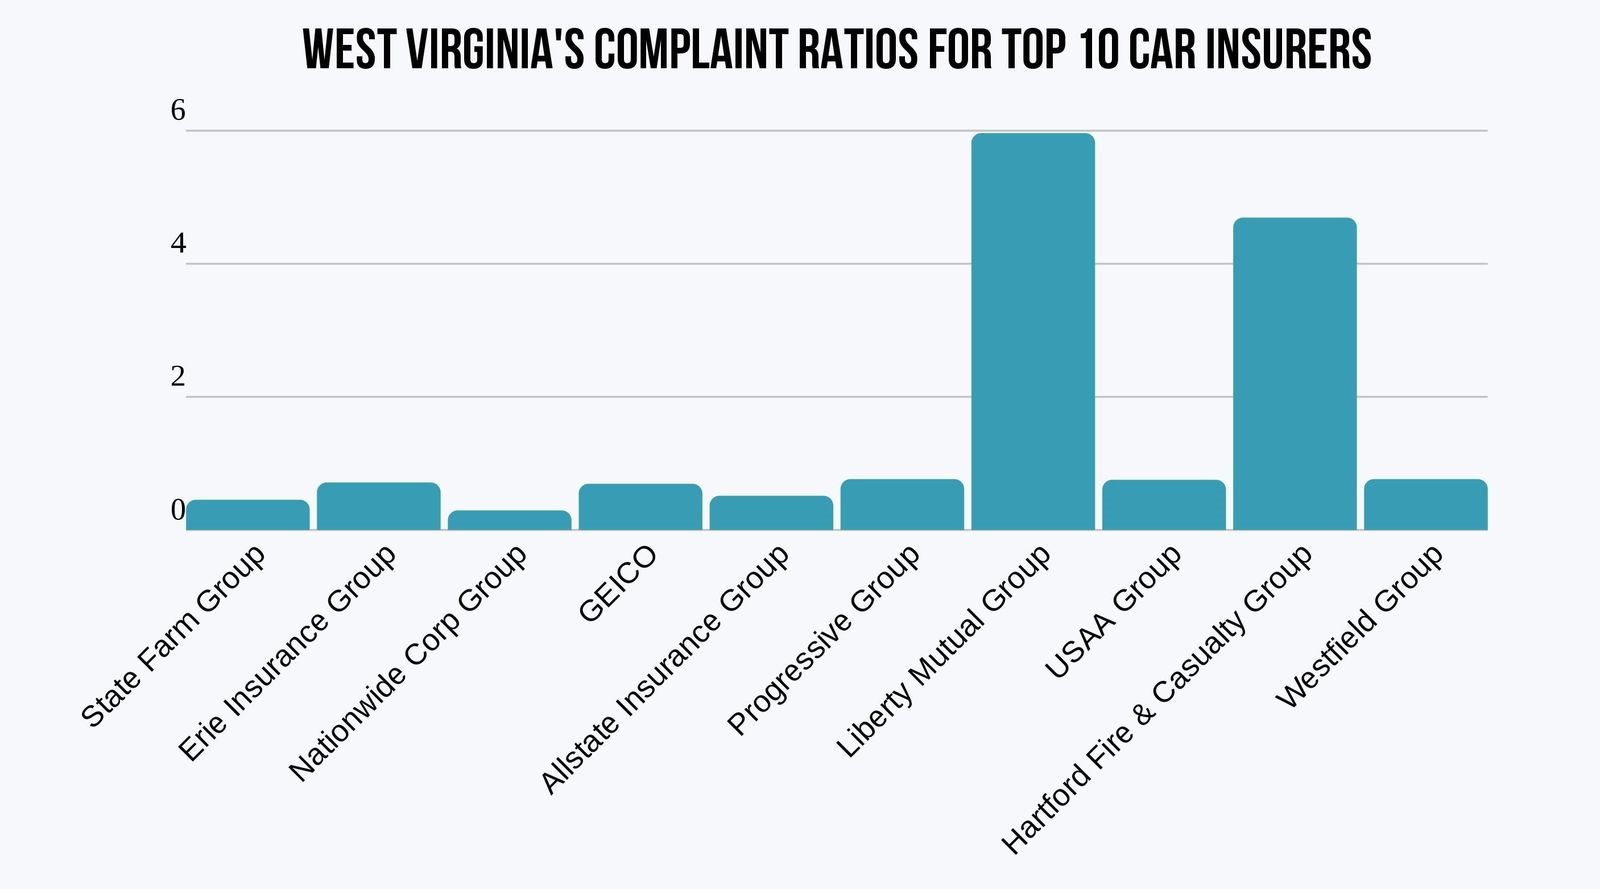 Bar graph of West Virginia's Complaint Ratio for the Top 10 Car Insurers